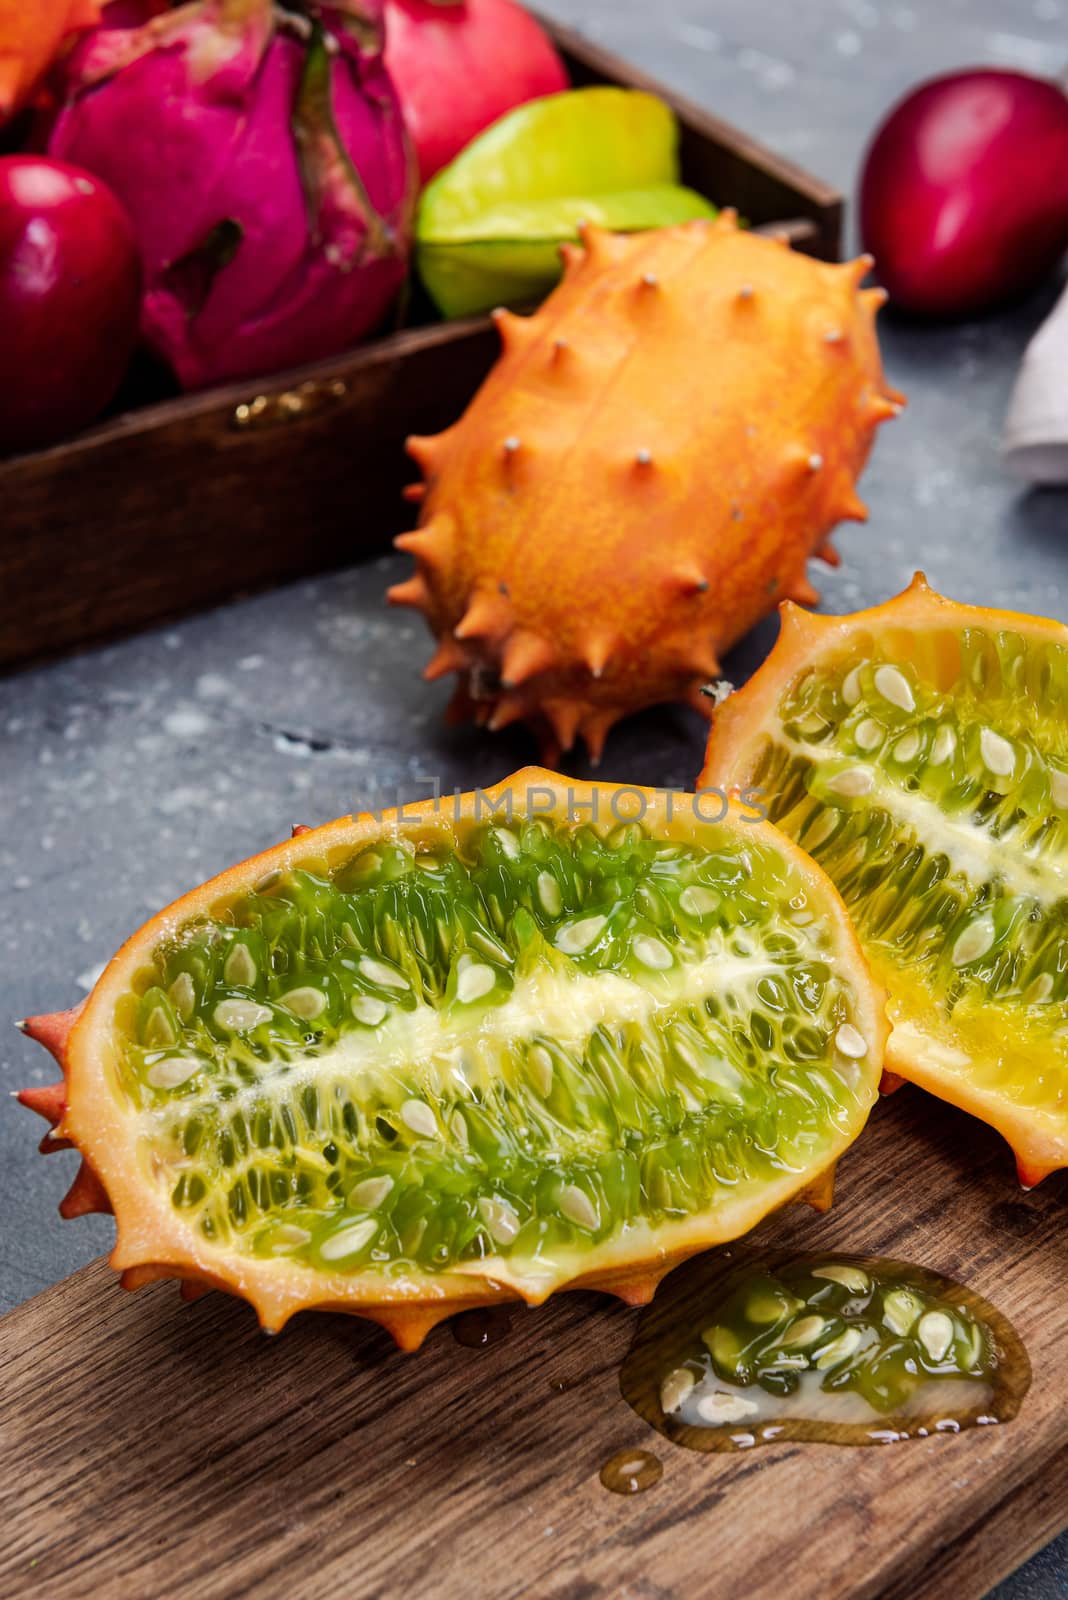 Whole and Cut Kiwano or Horned Melon Exotic Fruit on Board by merc67